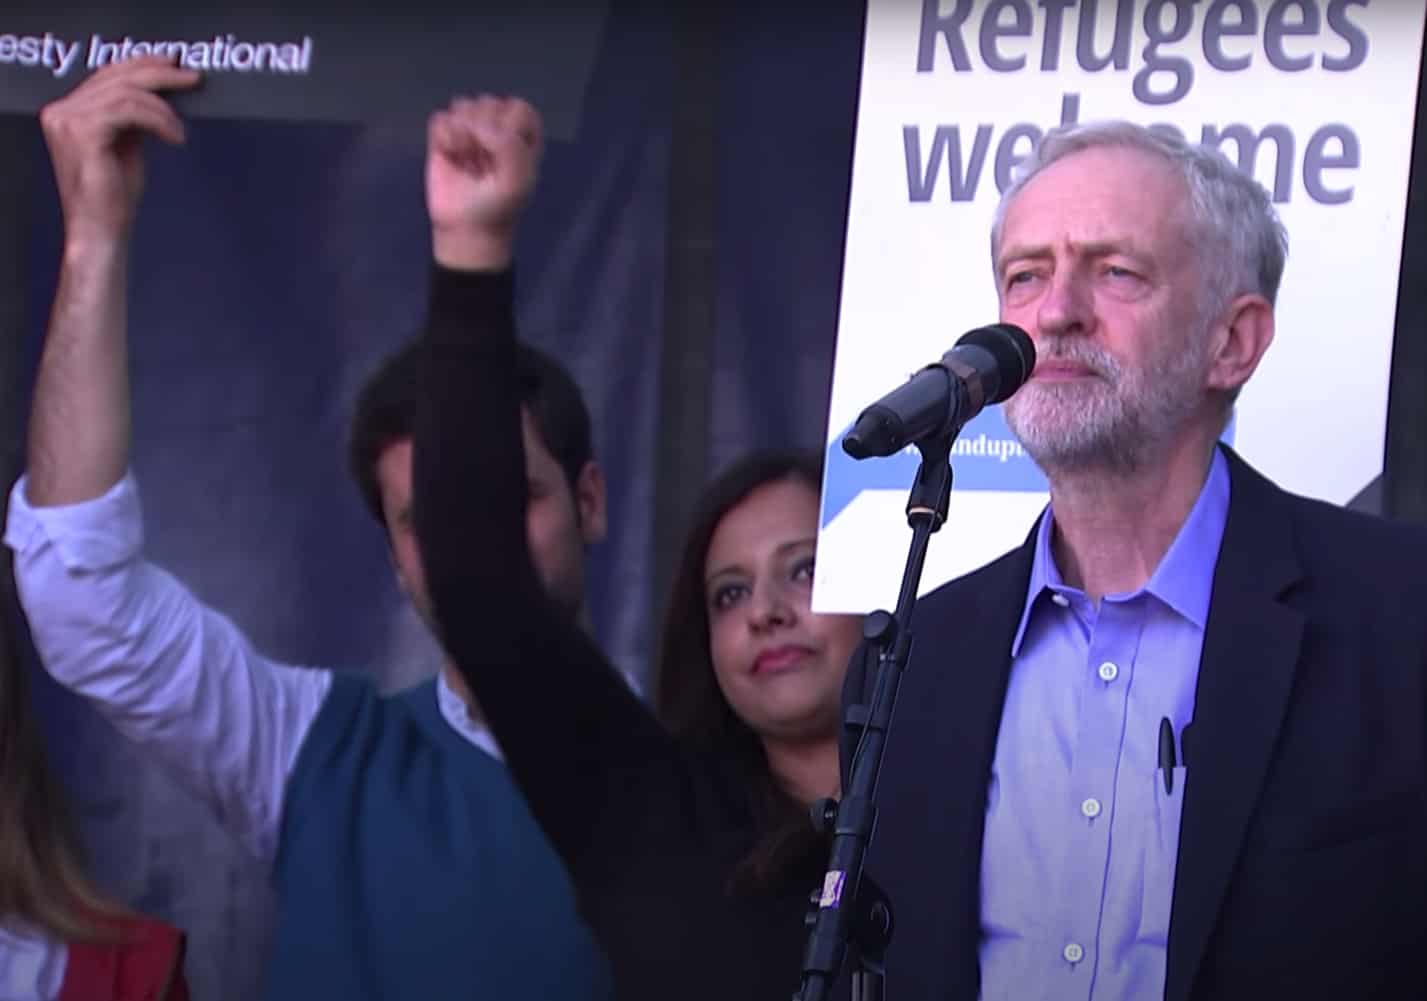 Flashback: To Jeremy Corbyn’s first address as Labour leader- at a Refugees Welcome rally